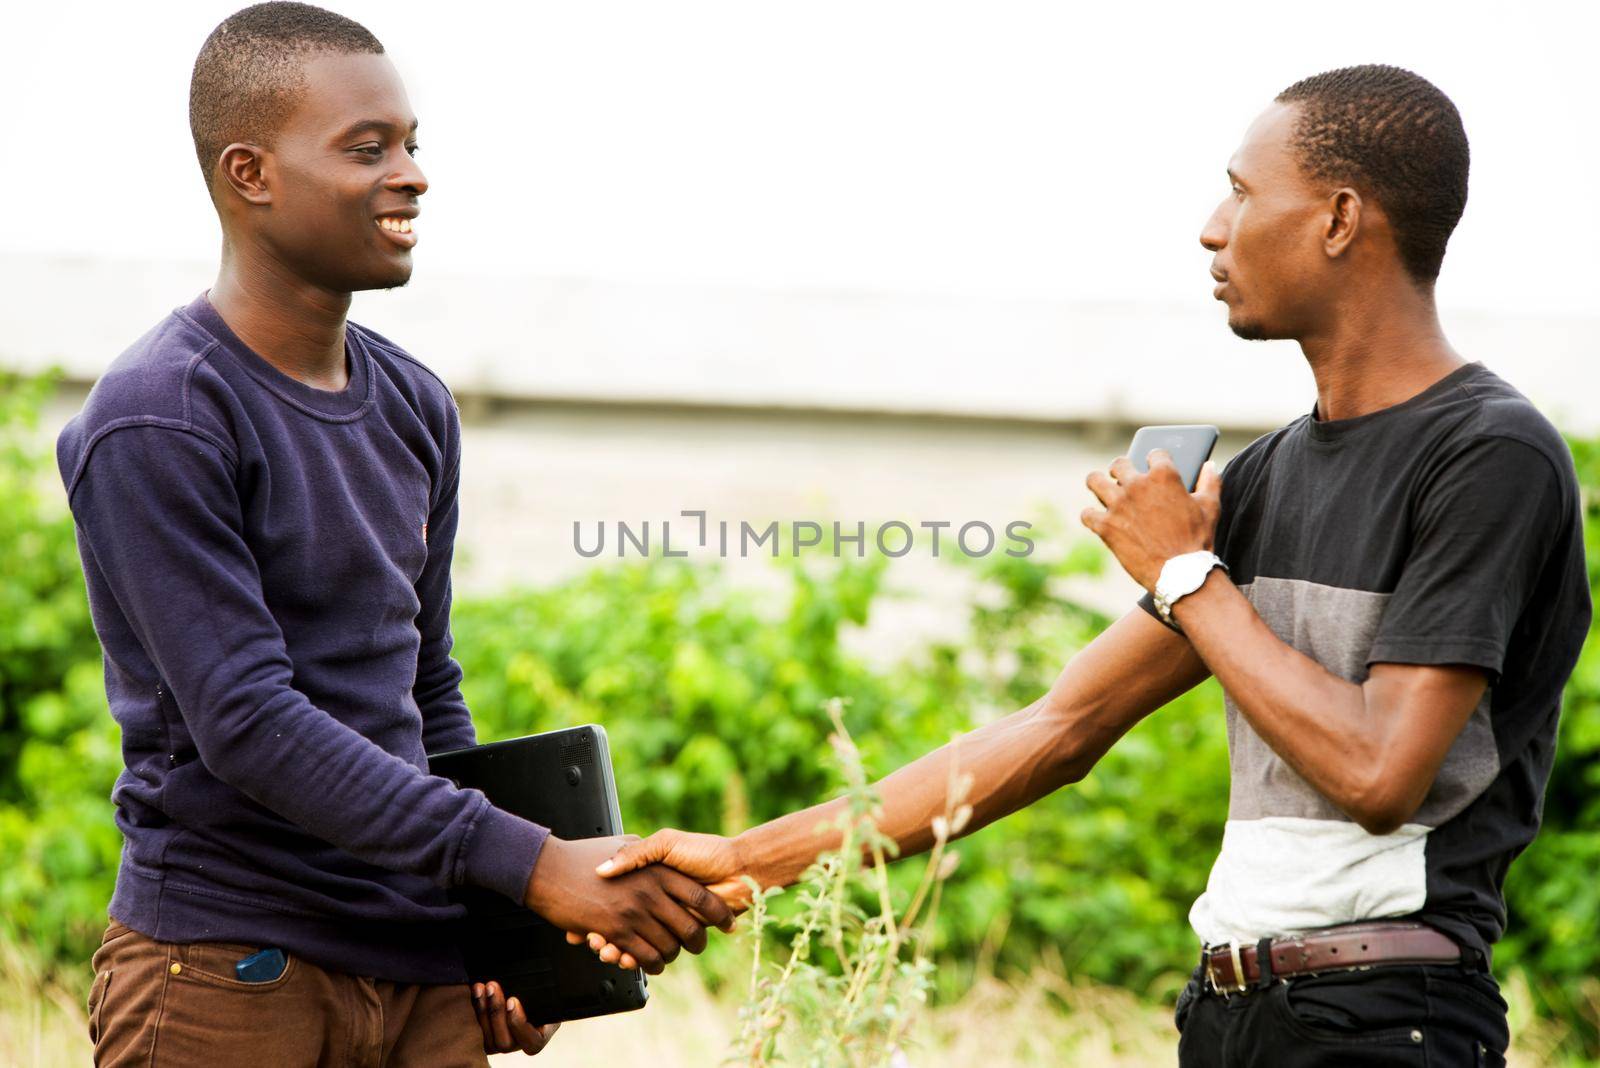 happy meeting and greeting between two young student standing in a field during the day and holding a computer in the hands